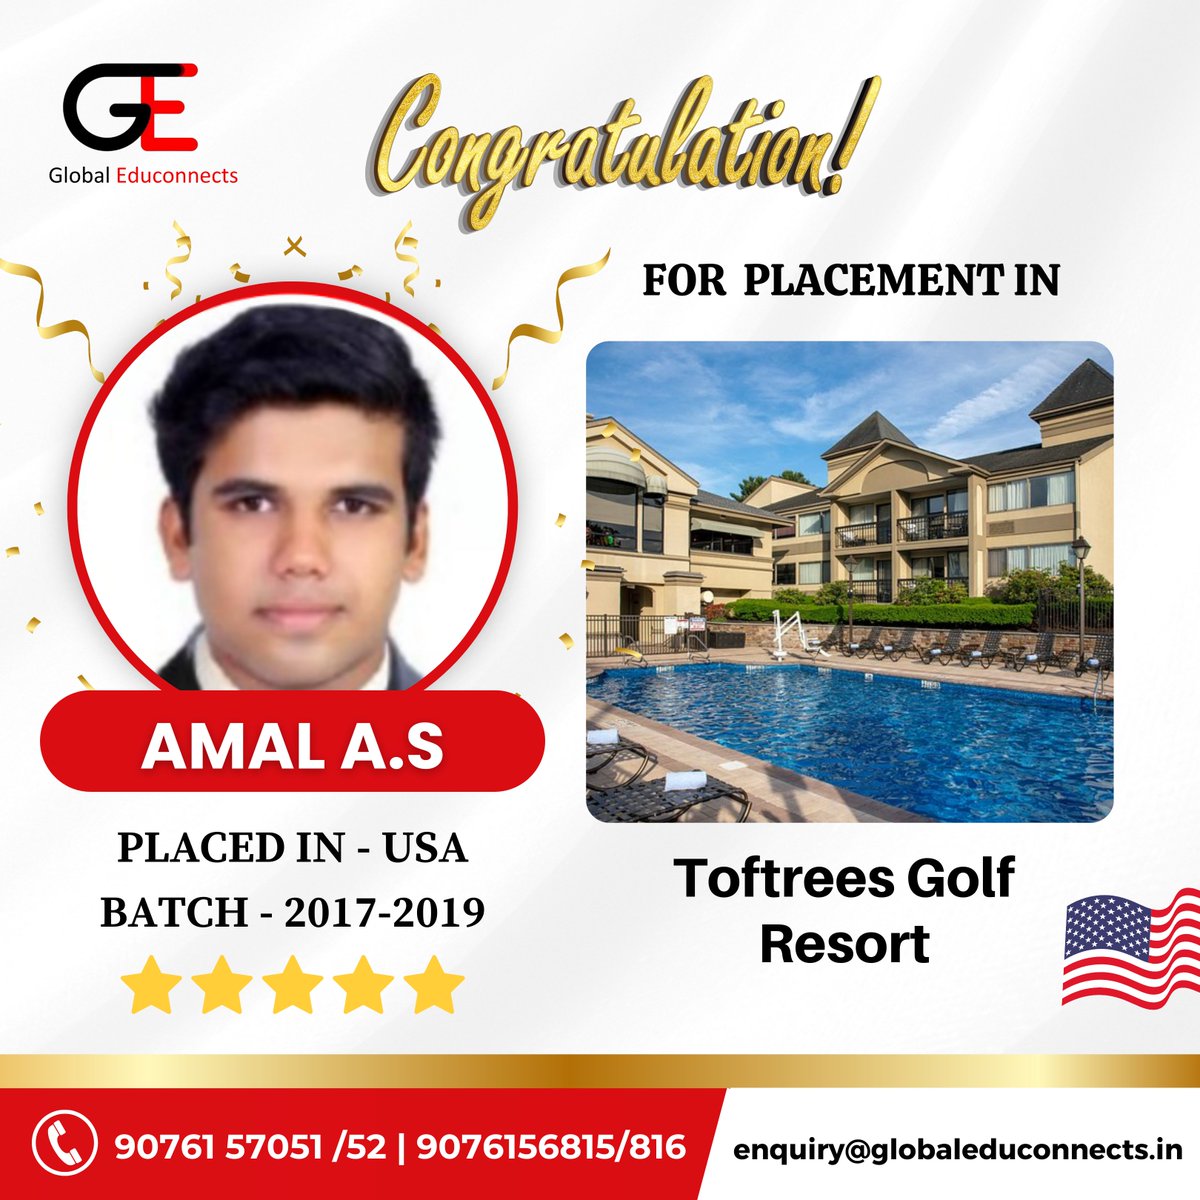 Congratulations!!! @amalfalco2  on successfully getting placed in the USA. 
Call Now - +91 90761 57051 / 90761 57052

#placementyear #studyabroad #abroadstudy #hospitalitymanagement #globaleduconnectes #studyinusa #studyinusa #studyinusa🗽 #studyinusa2024 #studyinusa2024